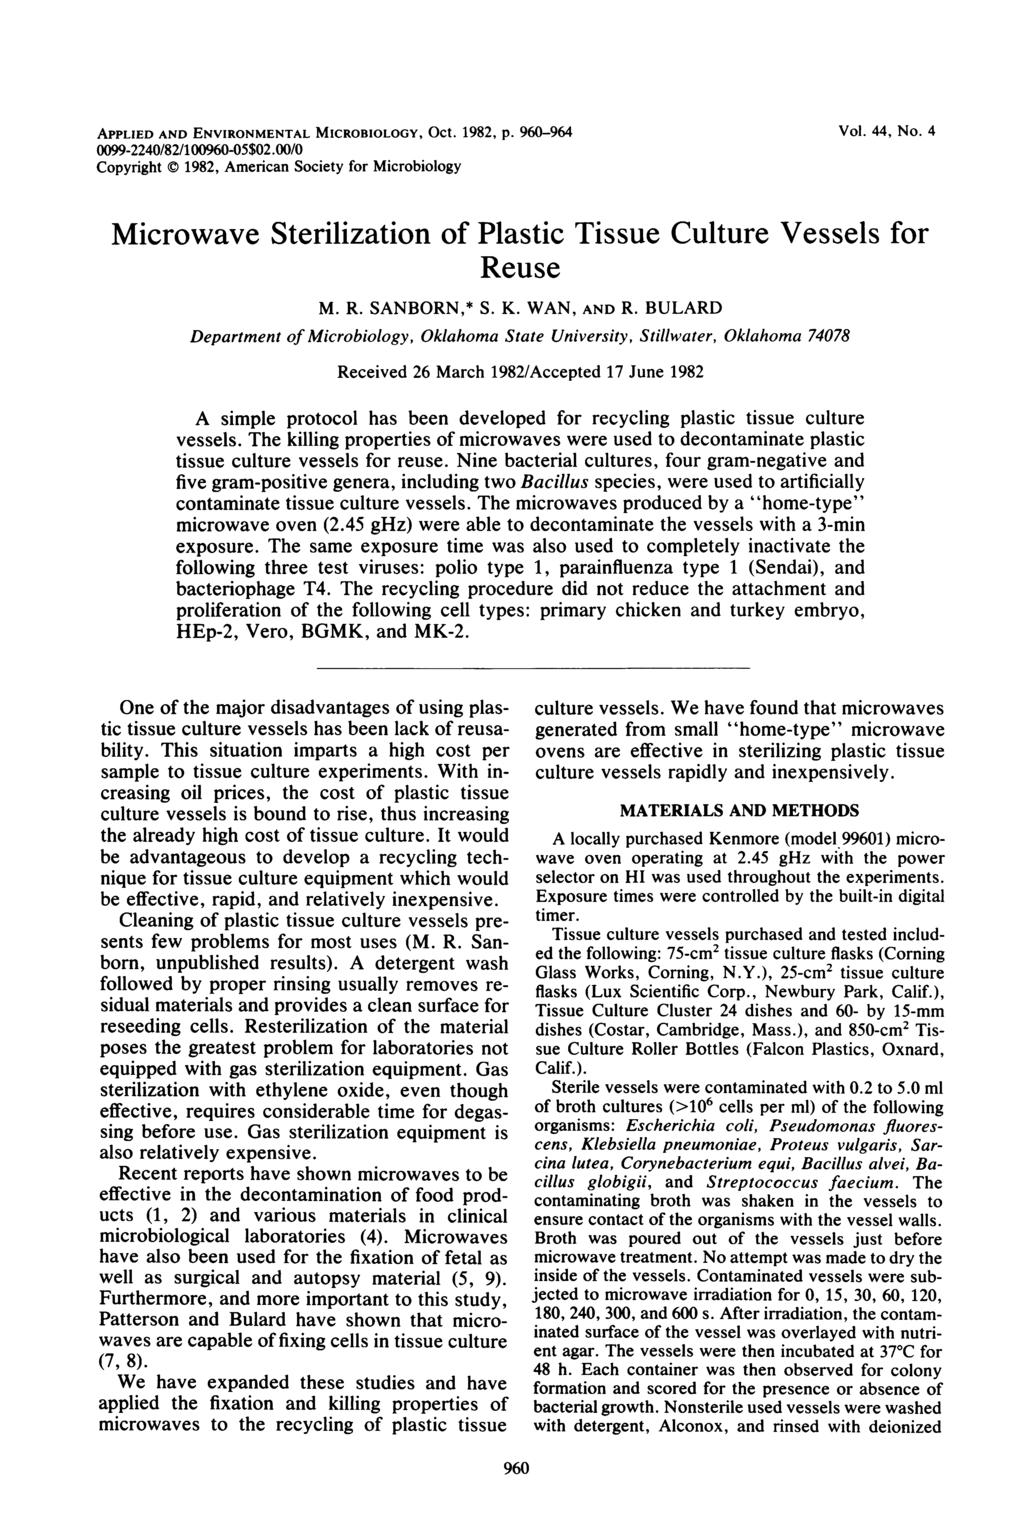 APPLIED AND ENVIRONMENTAL MICROBIOLOGY, OCt. 1982, p. 960-964 0099-2240/82/100960-05$02.00/0 Copyright 1982, American Society for Microbiology Vol. 44, No.